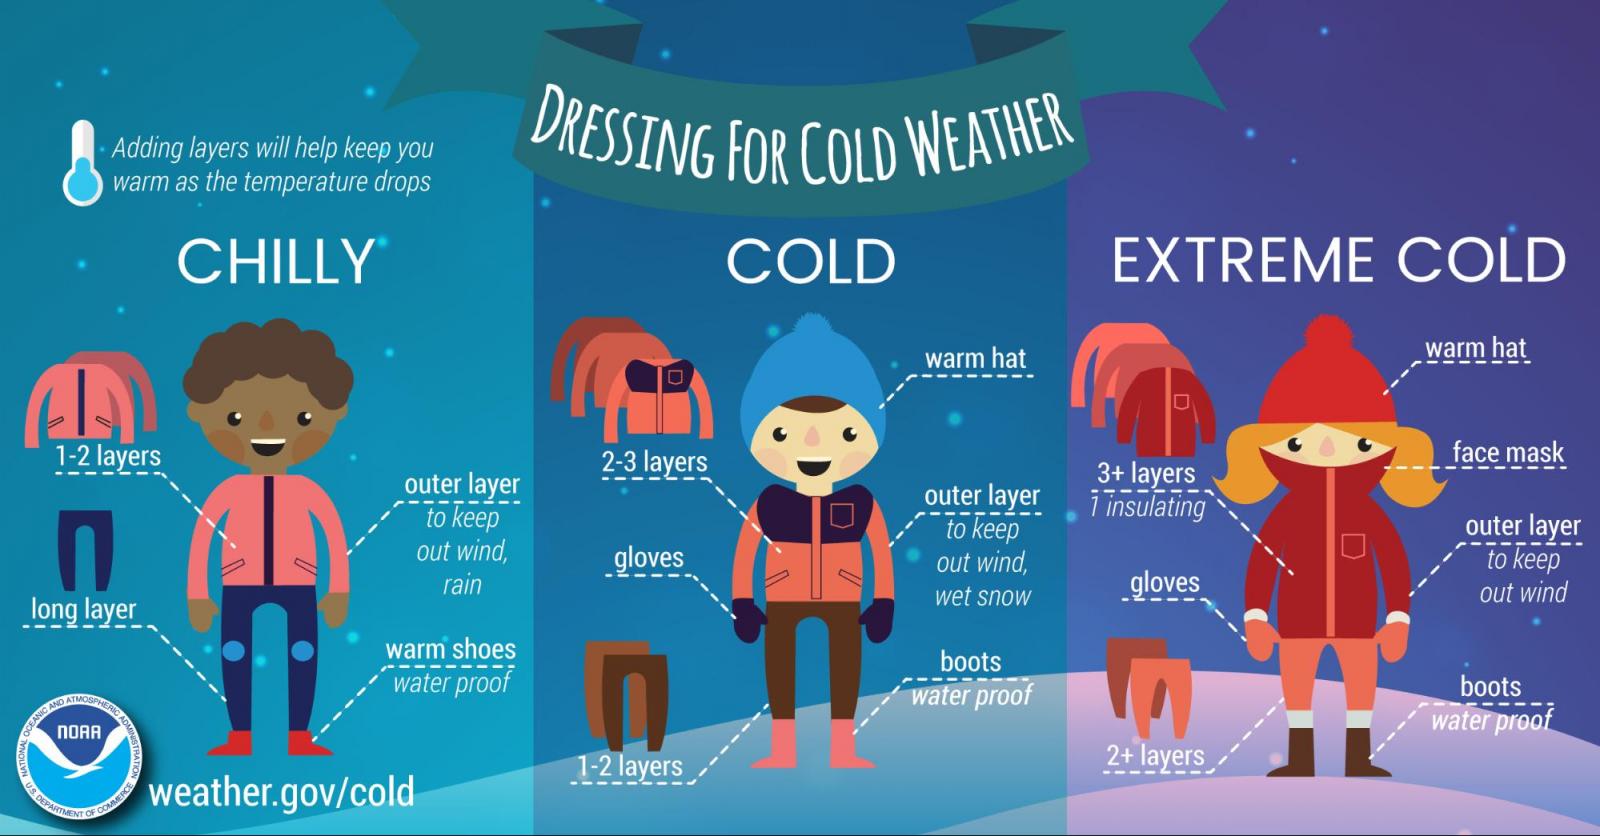 Cold - Dress In Layers